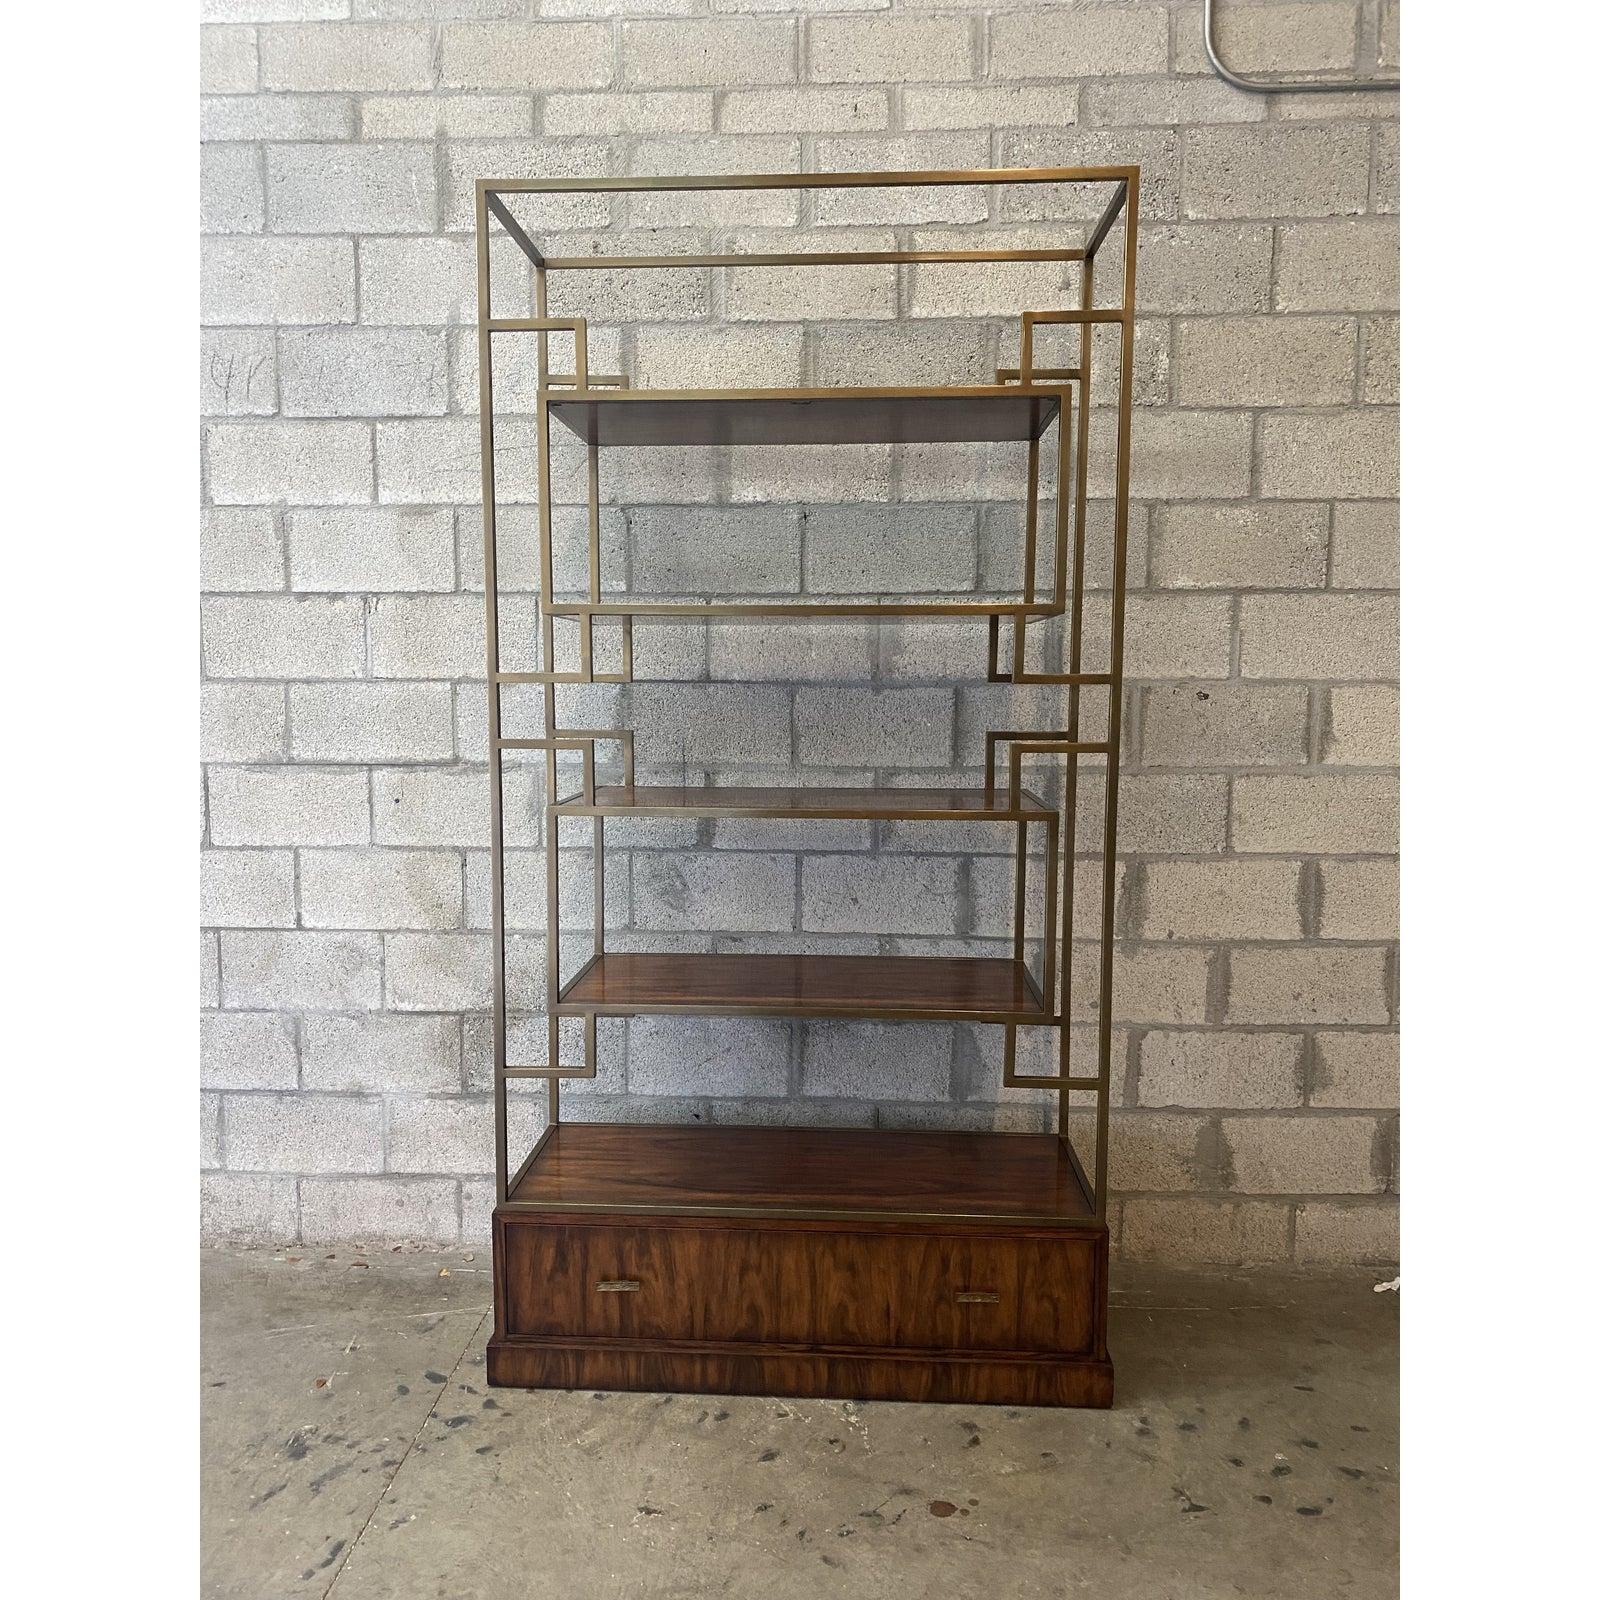 Stunning vintage Theodore Alexander etagere. Gleaning Pacific walnut and brass frame. Part of the Vanucci Eclectics collection a fabulous addition to any project.